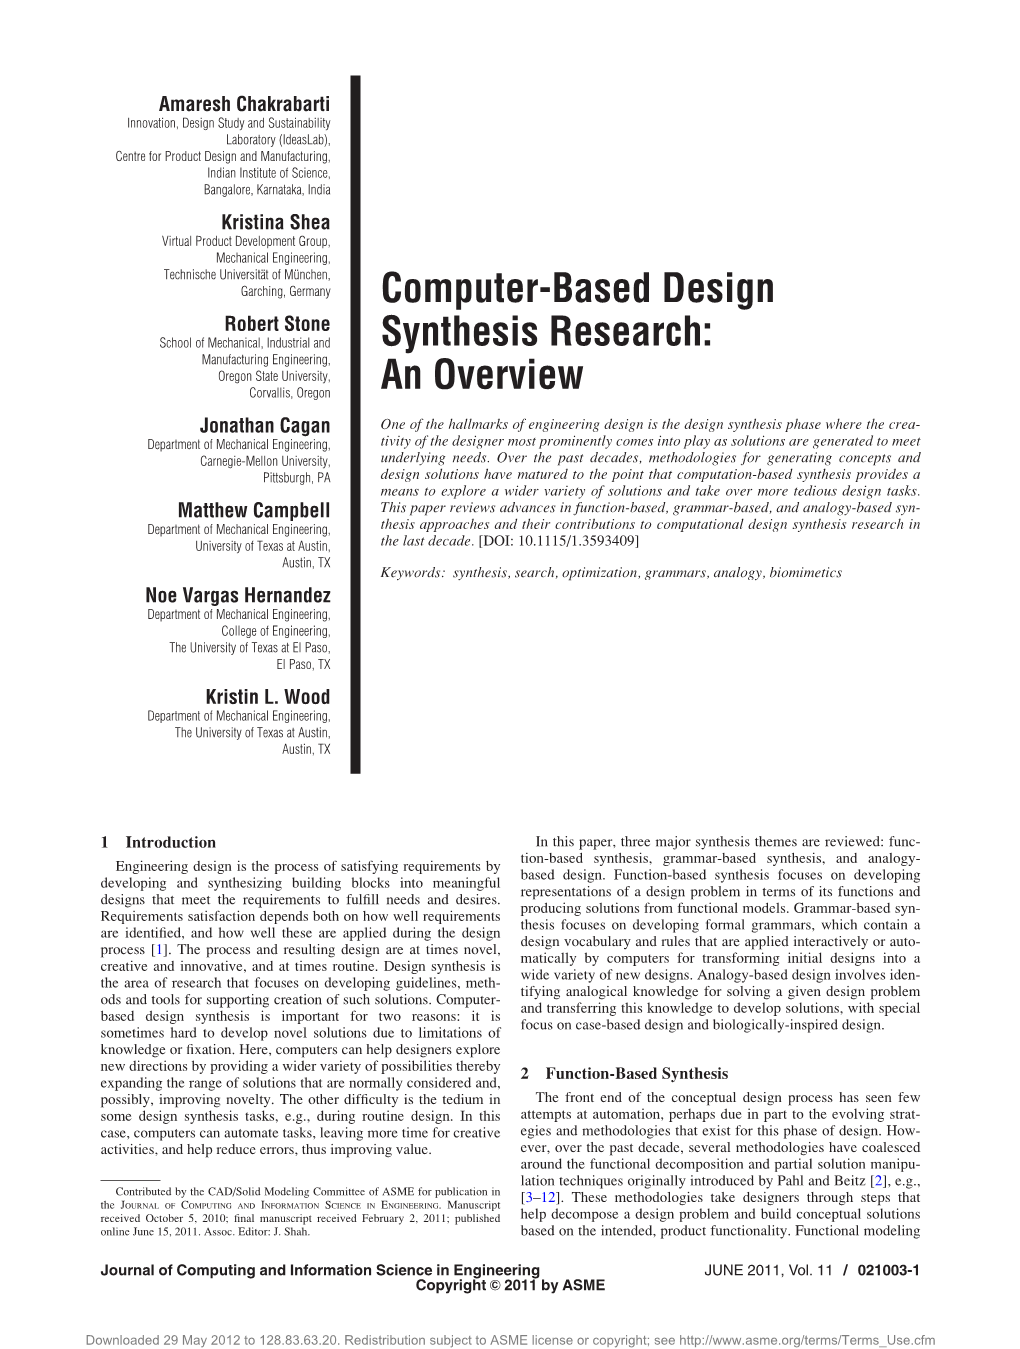 Computer-Based Design Synthesis Research: an Overview